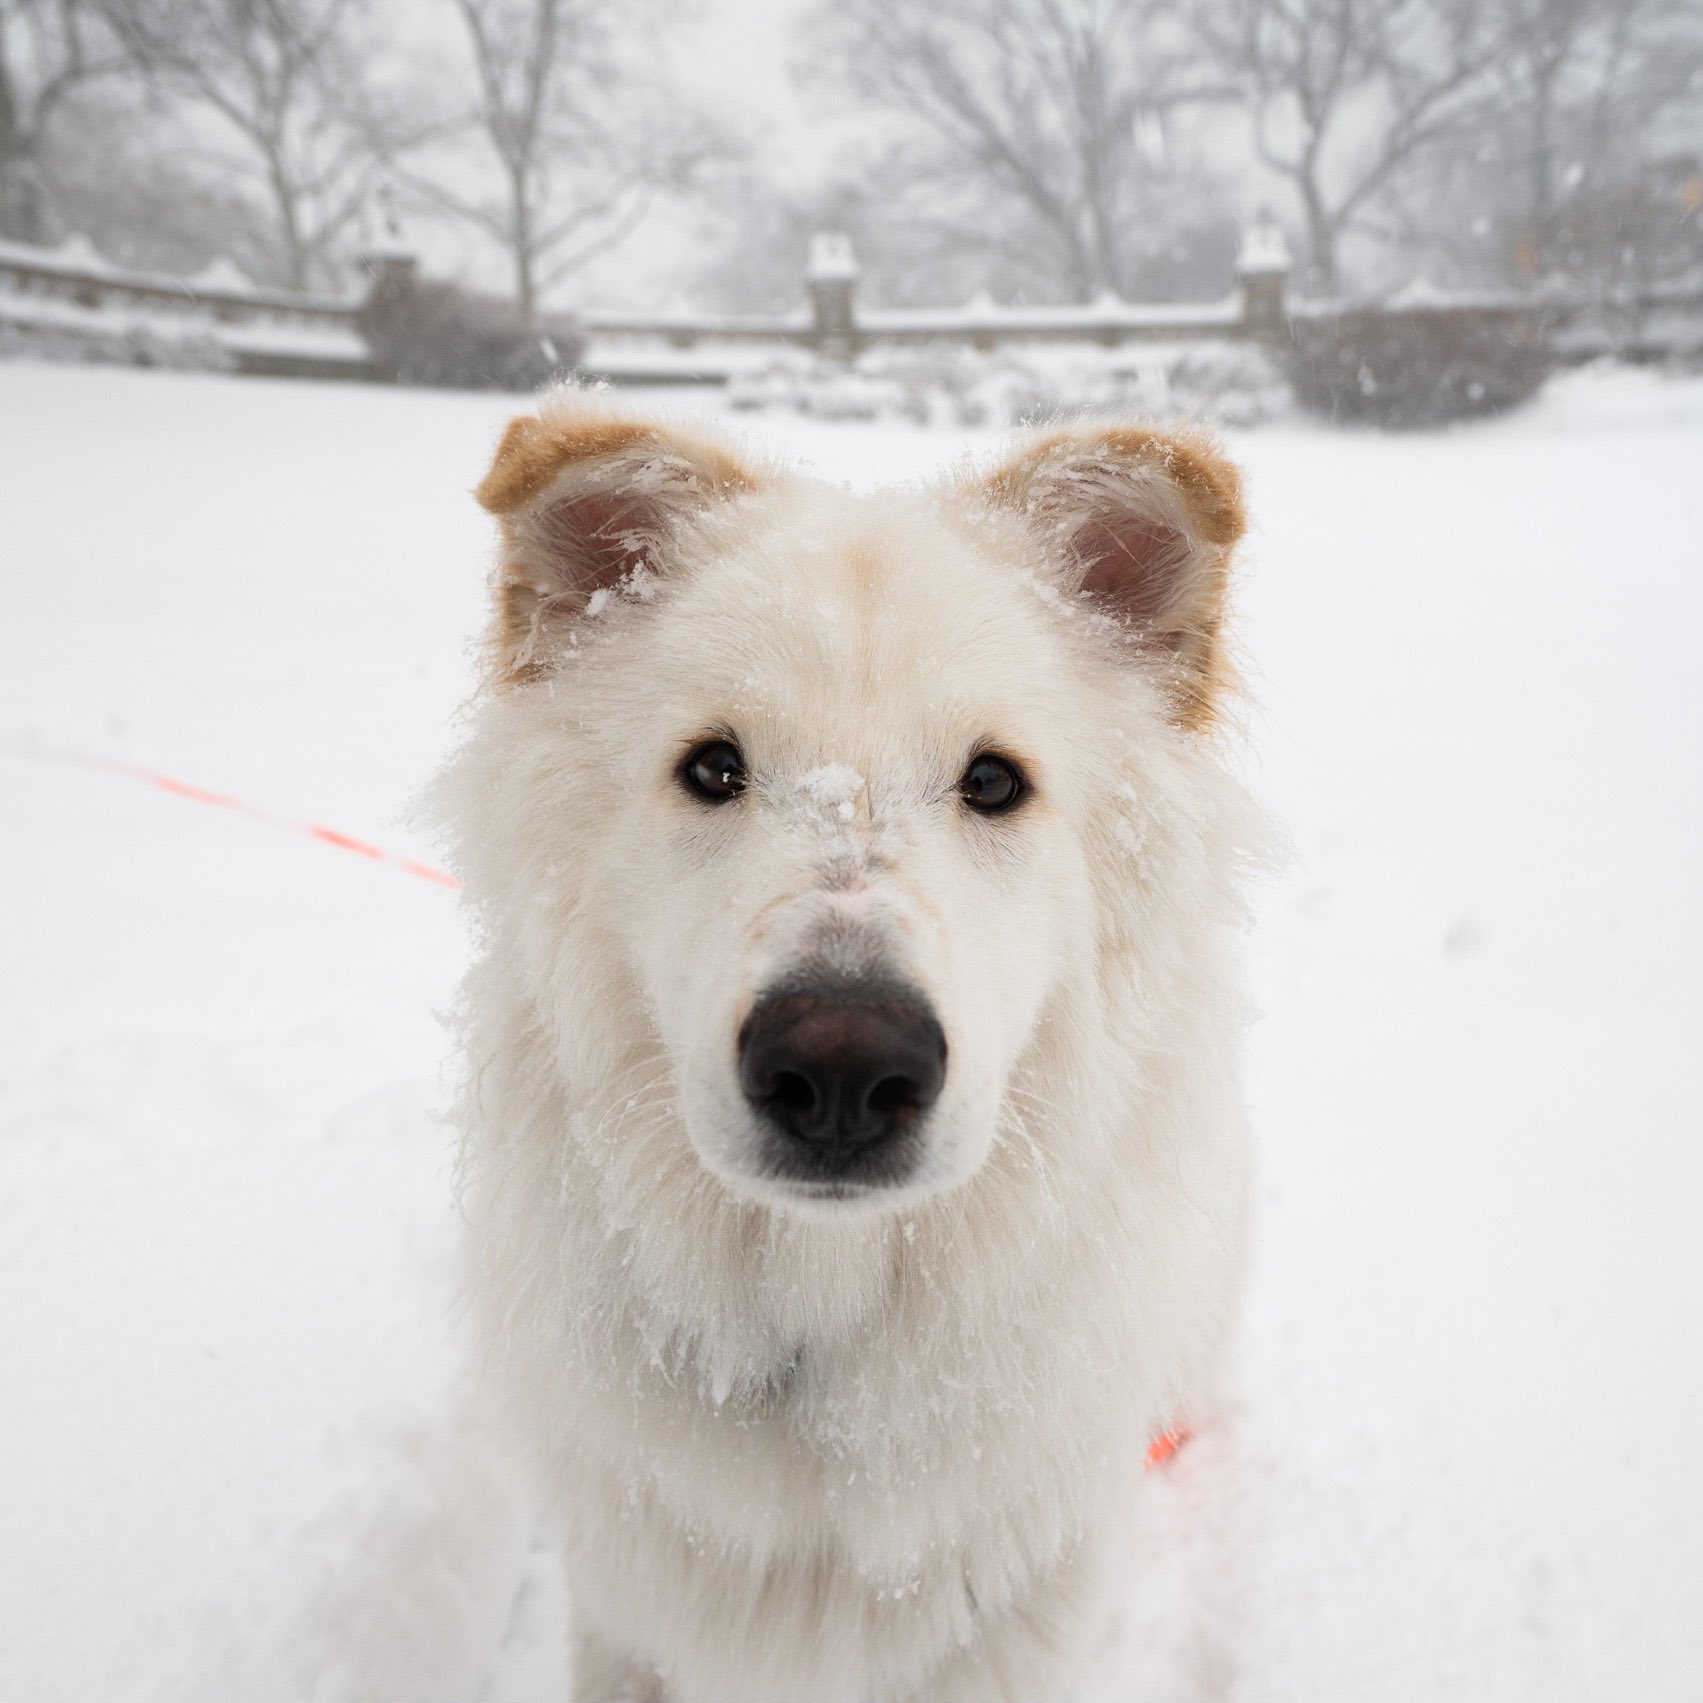 The on Twitter: "Polaris, Shepherd/Samoyed mix (1 y/o), Central Park, New York, NY • “He would rather sit on the corner and watch everything go by instead of going home. He